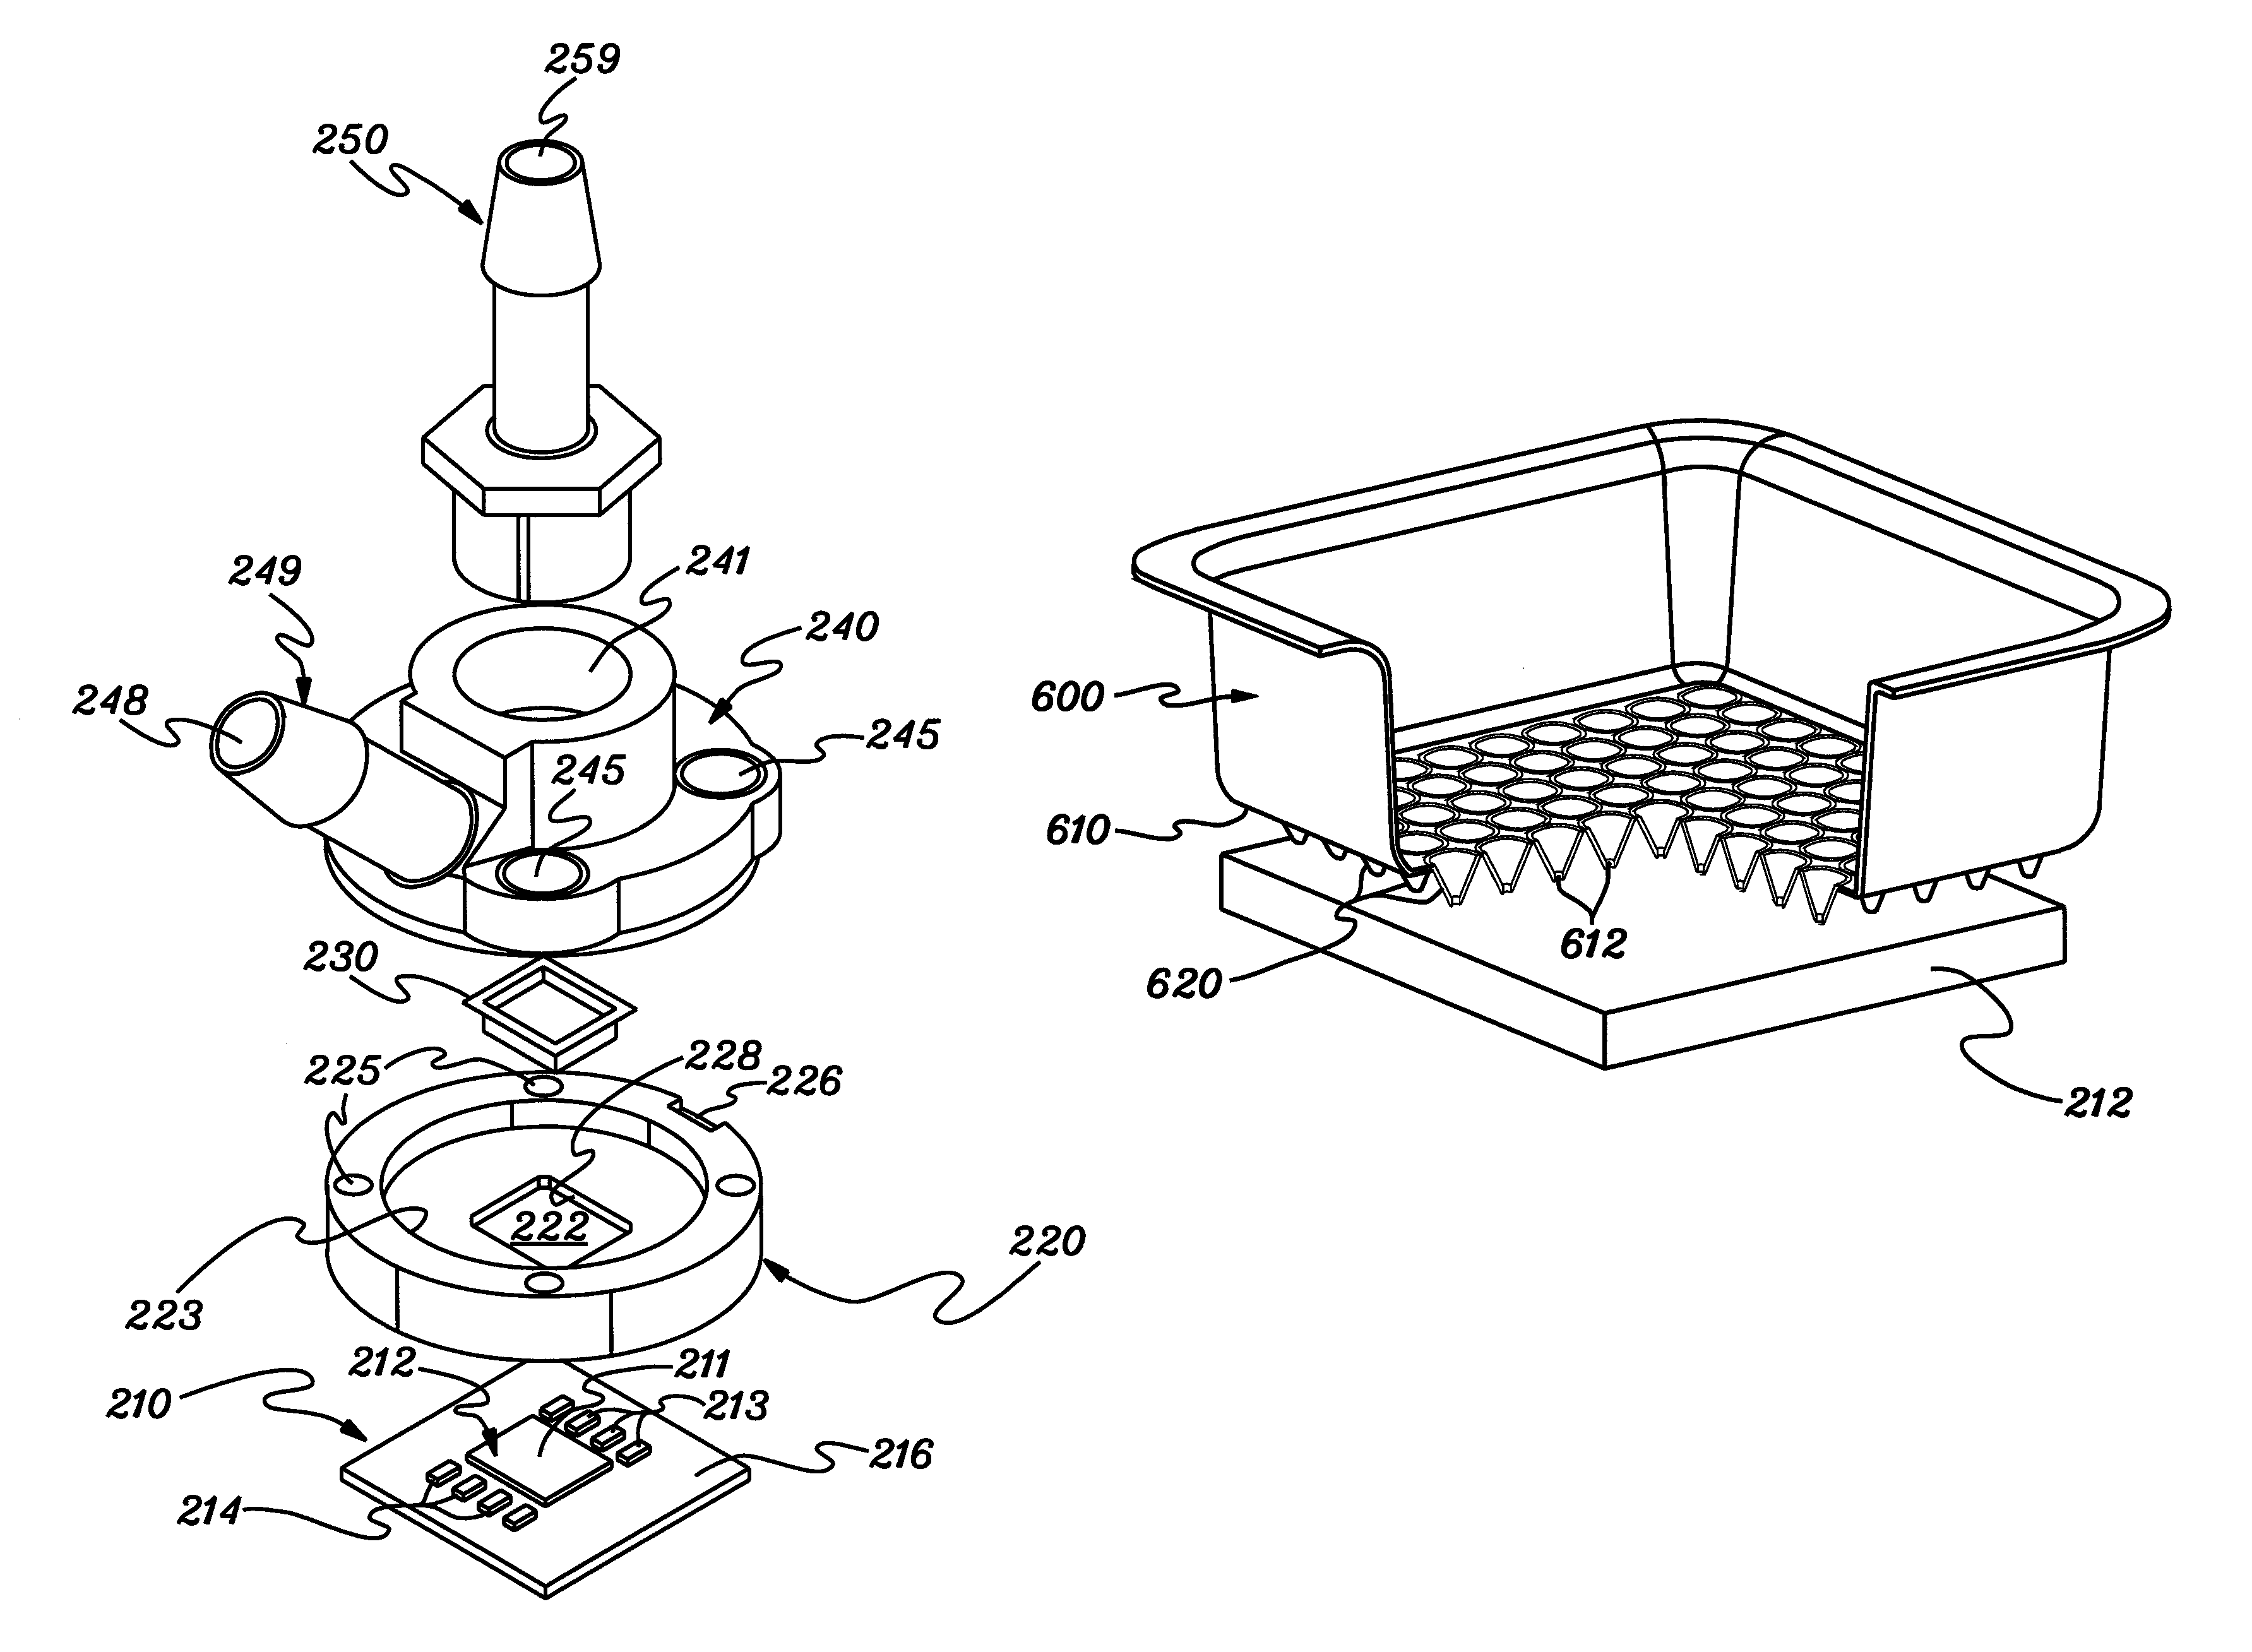 Jet orifice plate with projecting jet orifice structures for direct impingement cooling apparatus